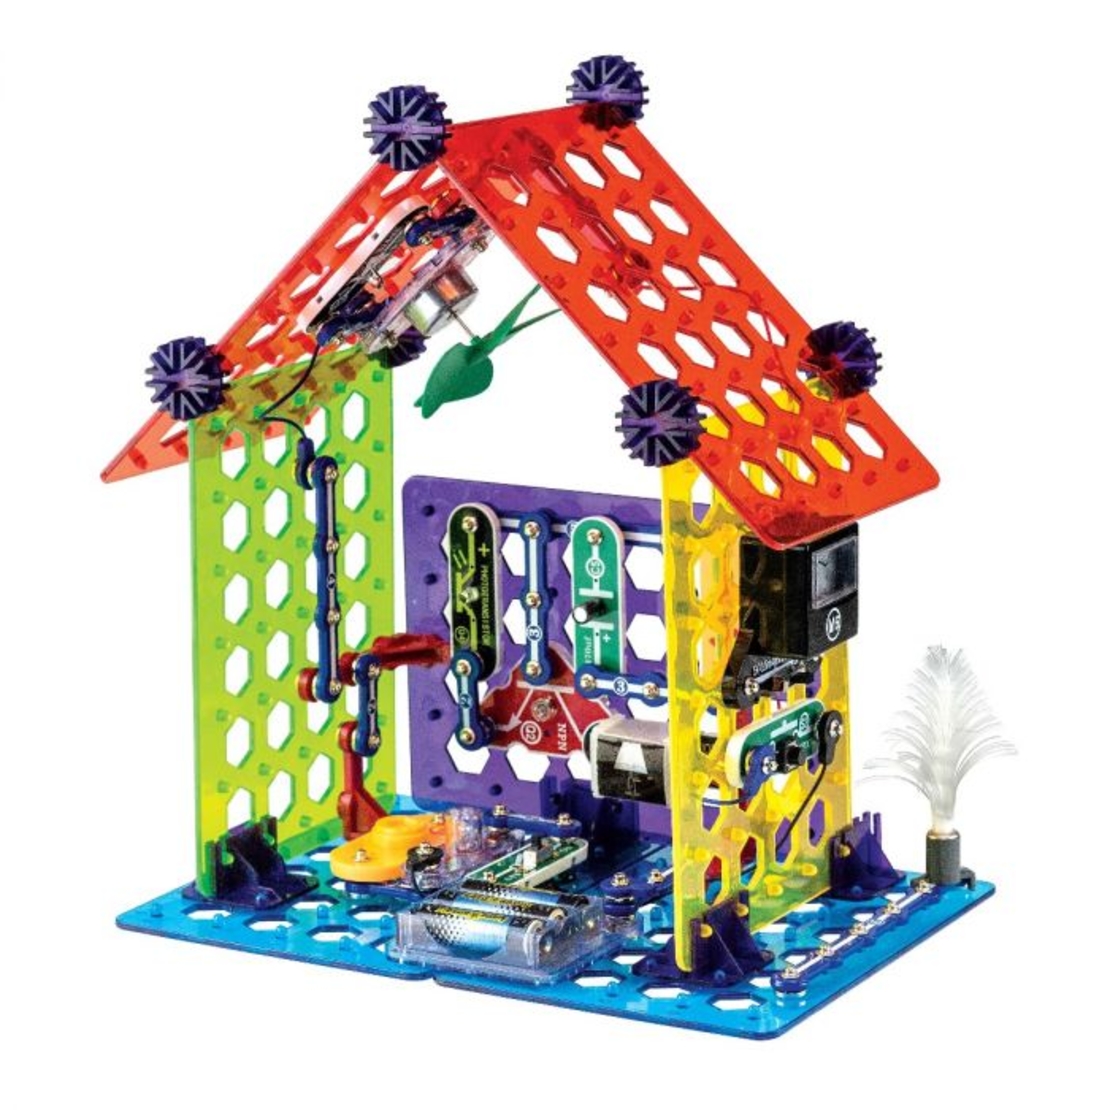 Snap Circuits SCMYH7 My Home